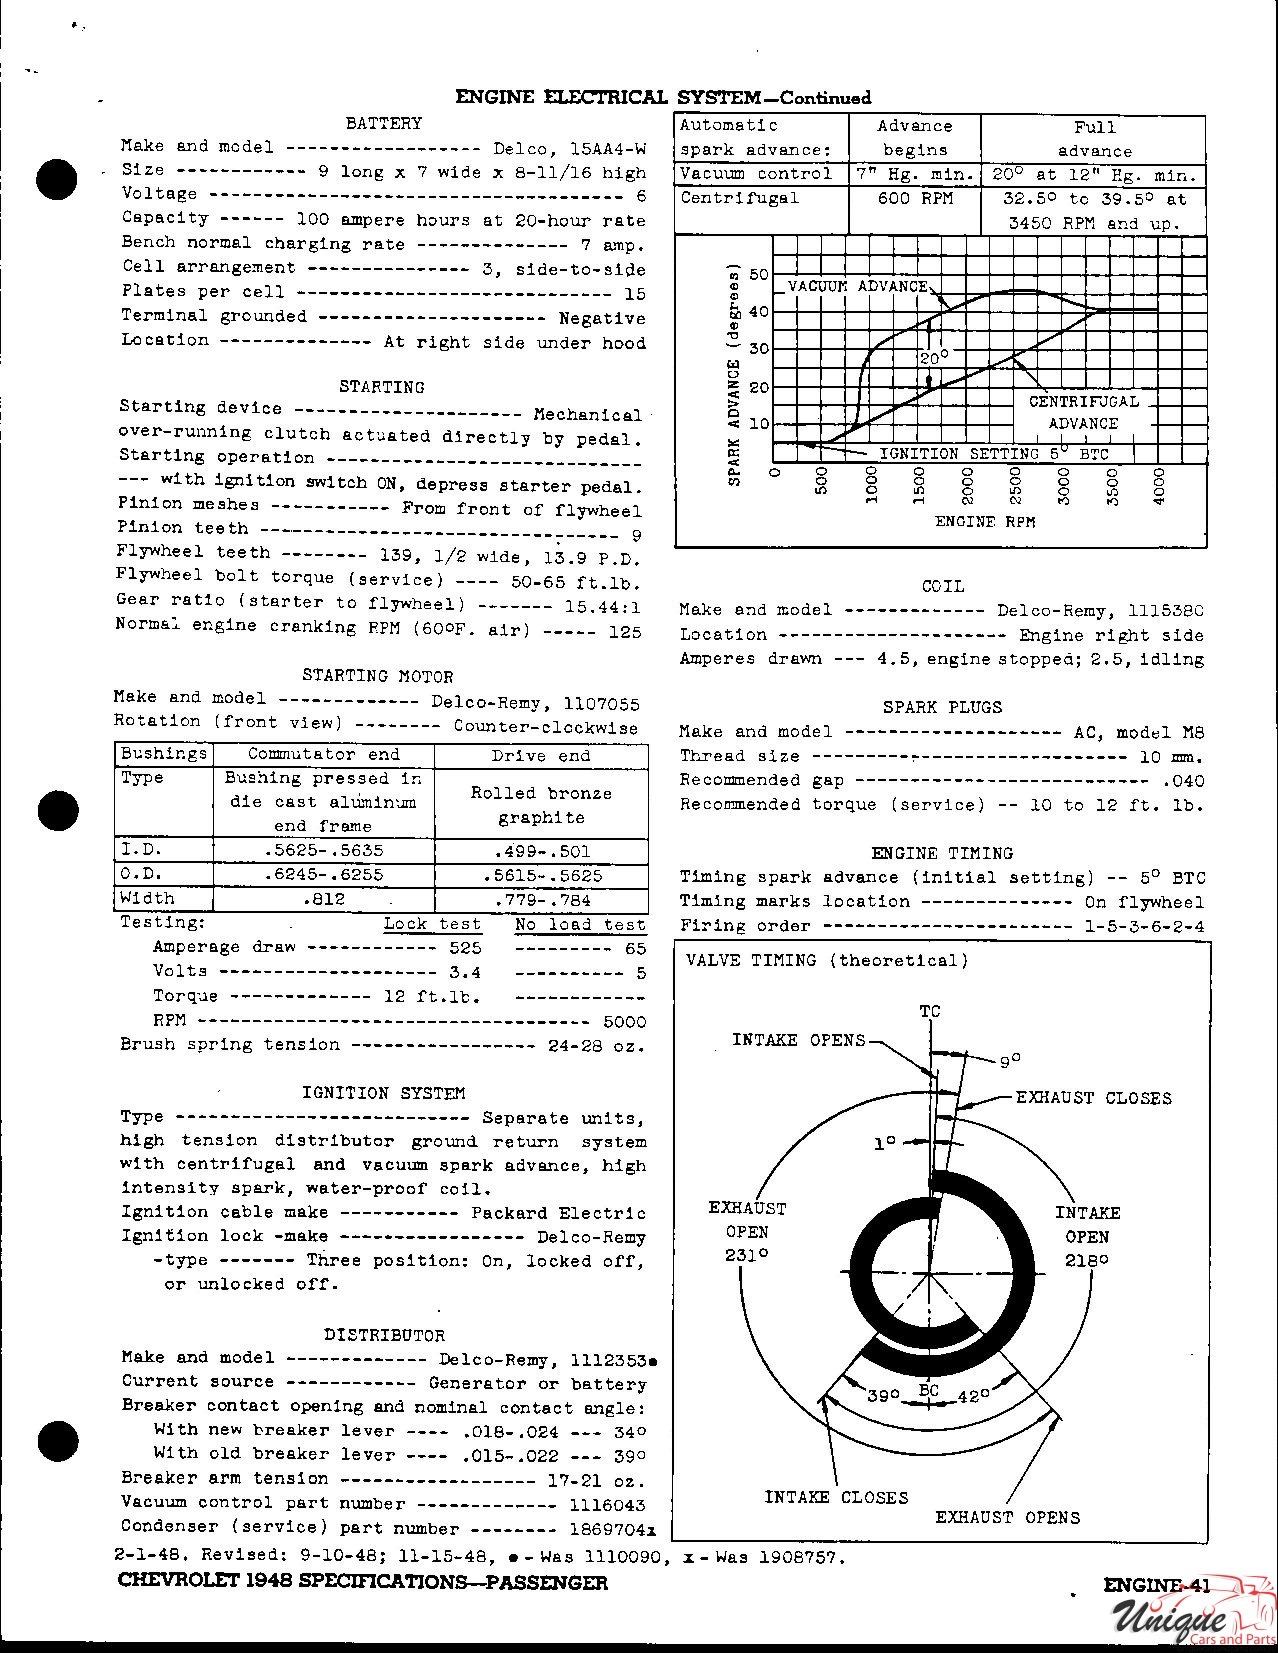 1948 Chevrolet Specifications Page 16